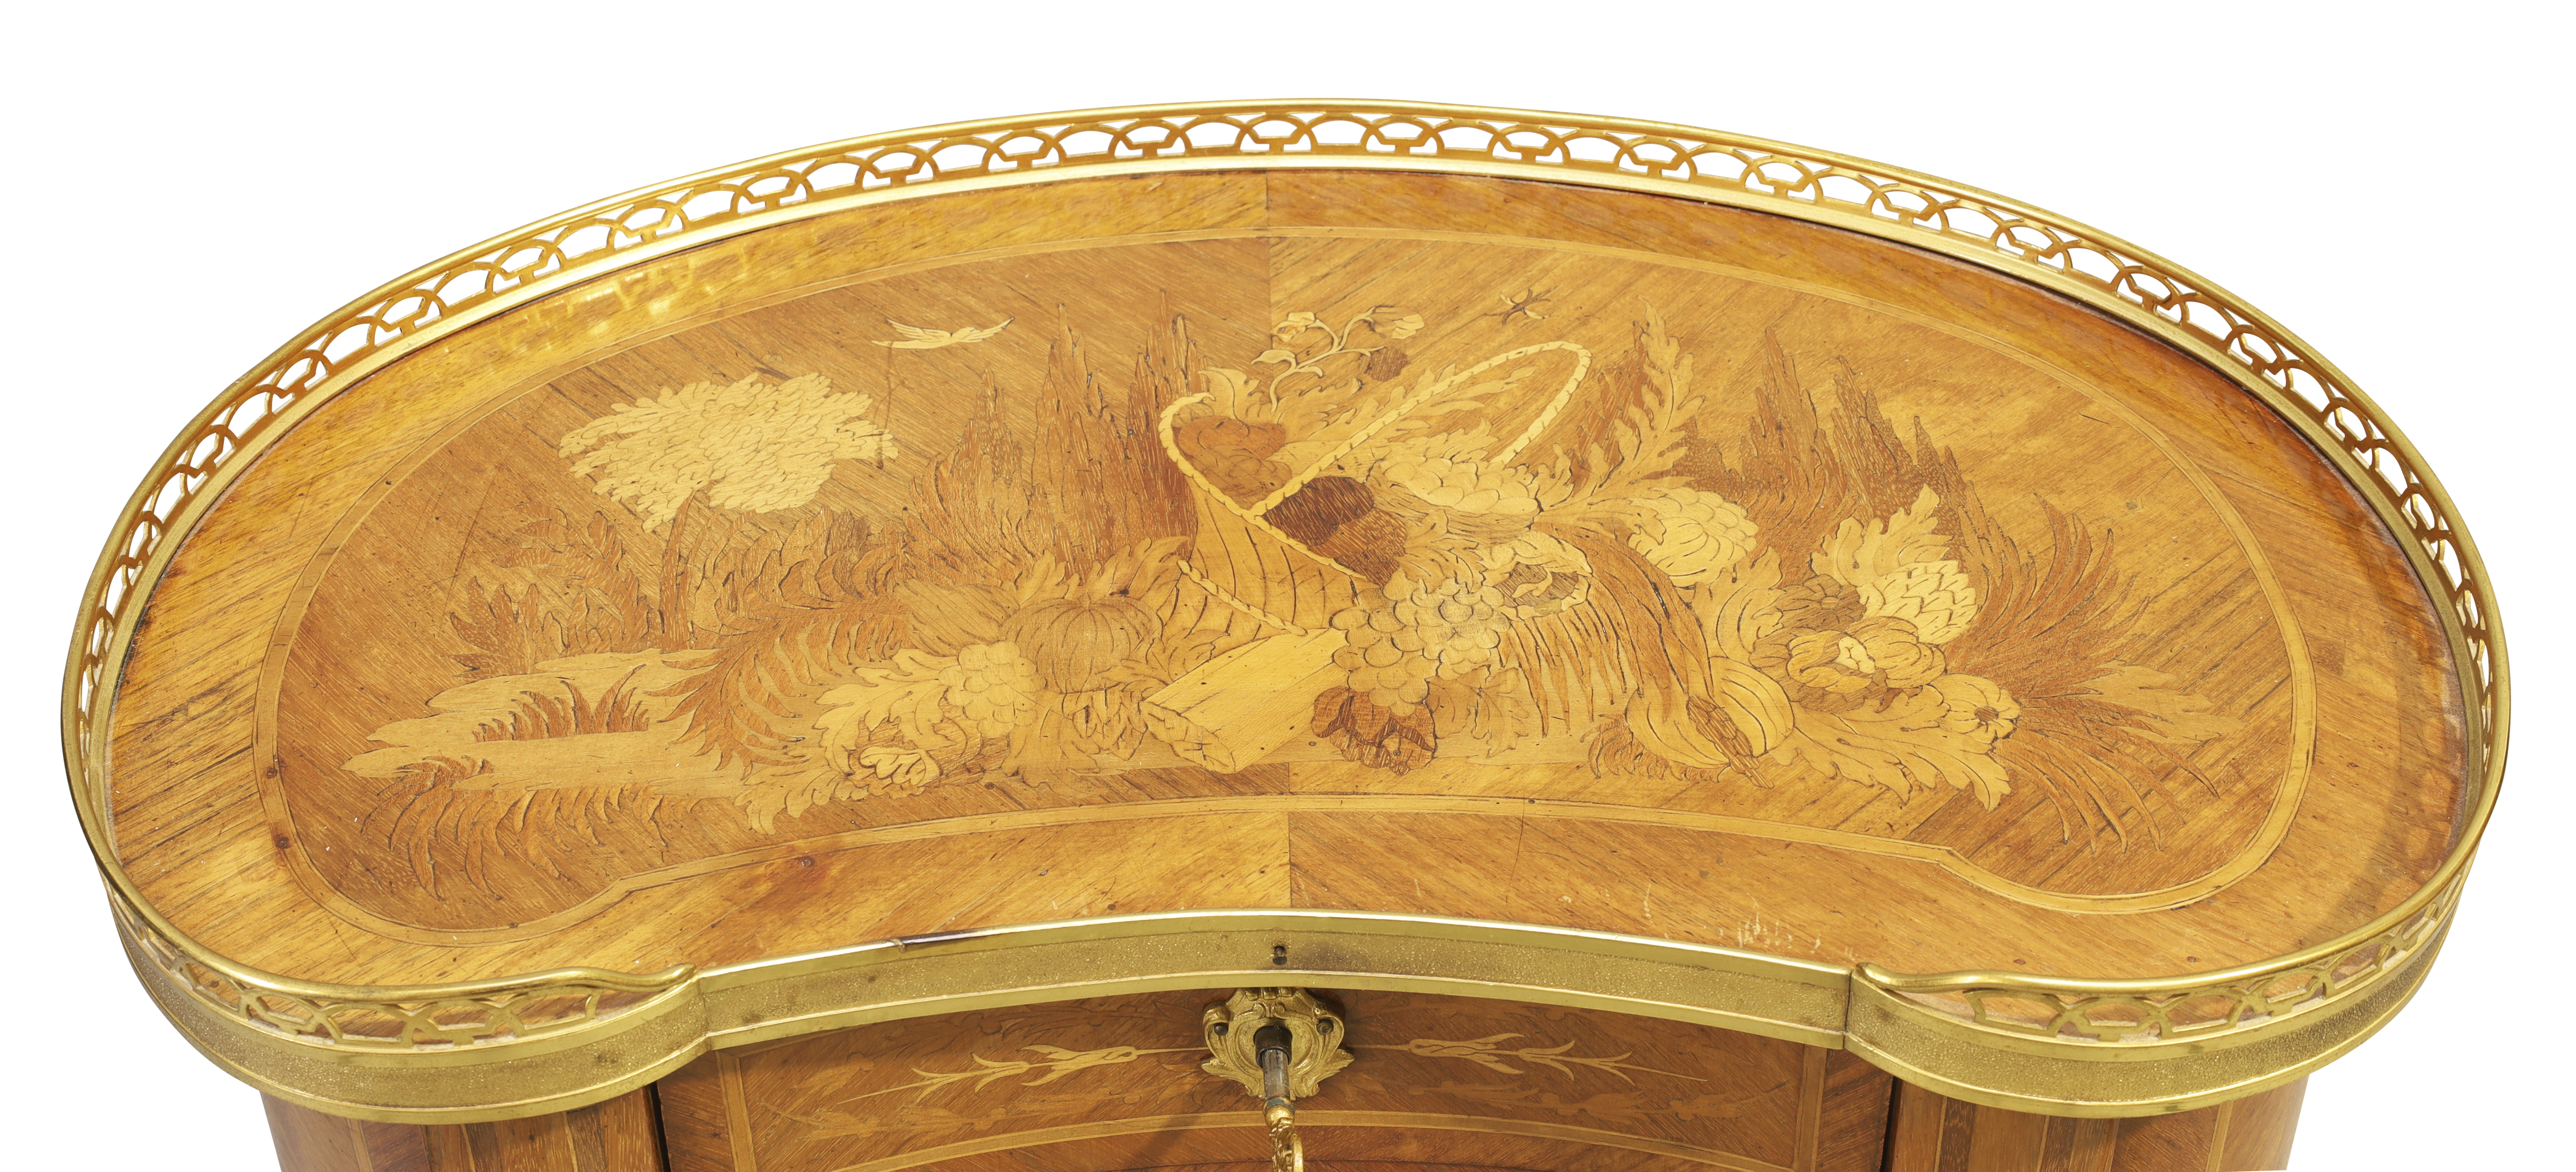 A French kingwood and marquetry inlaid kidney shape side table, In the manner of Charles Topino, ... - Image 3 of 4